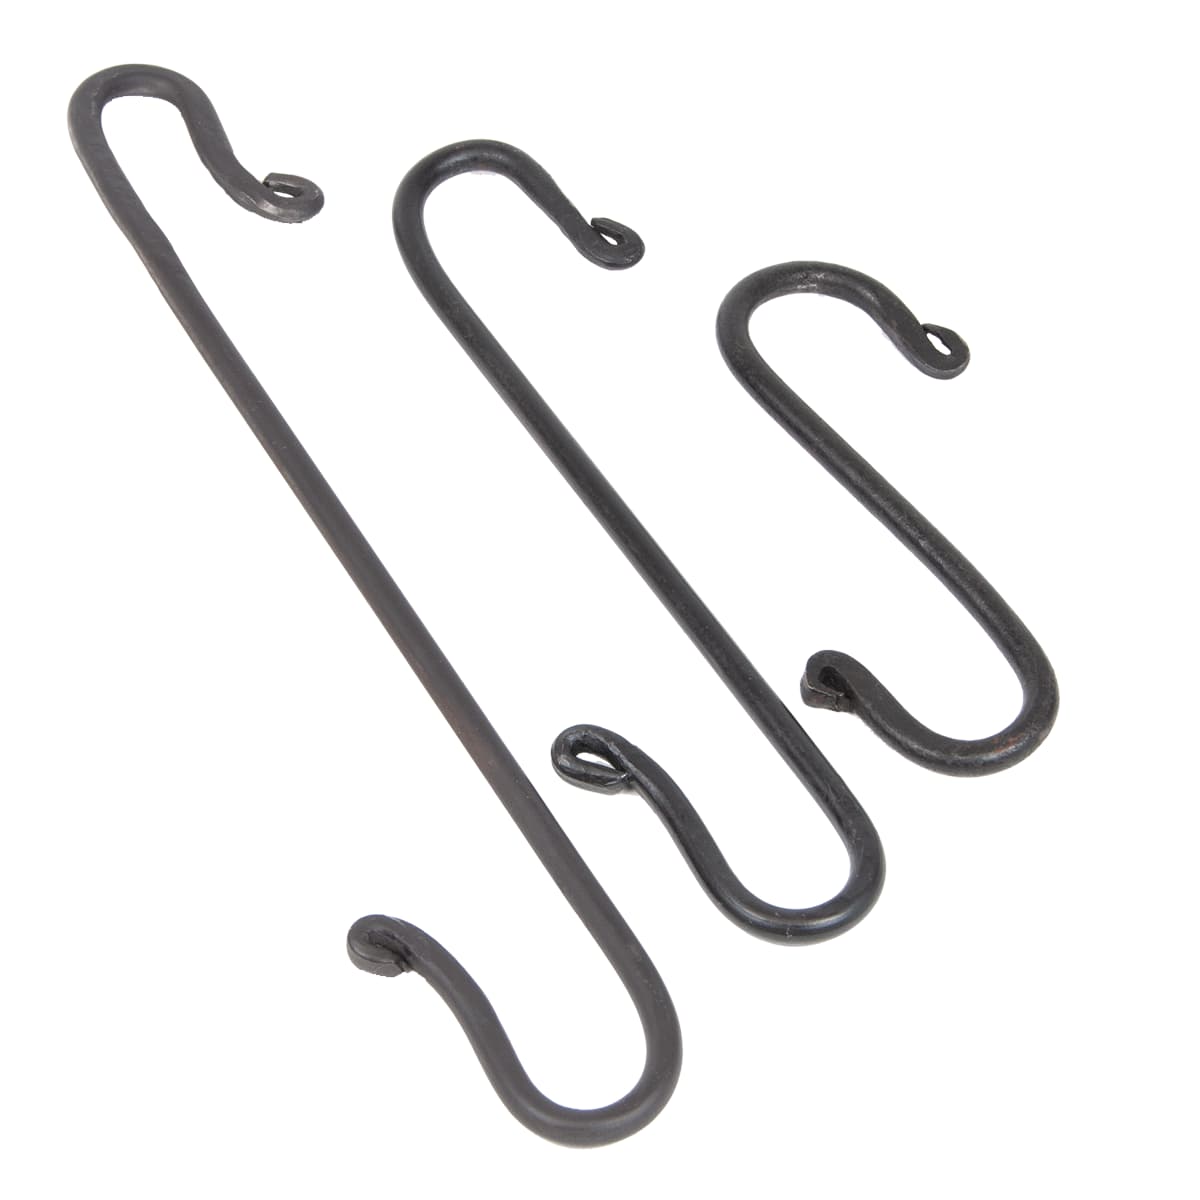 https://www.canadianoutdoorequipment.com/backend/images/P/forged-iron-hooks-coec.jpg